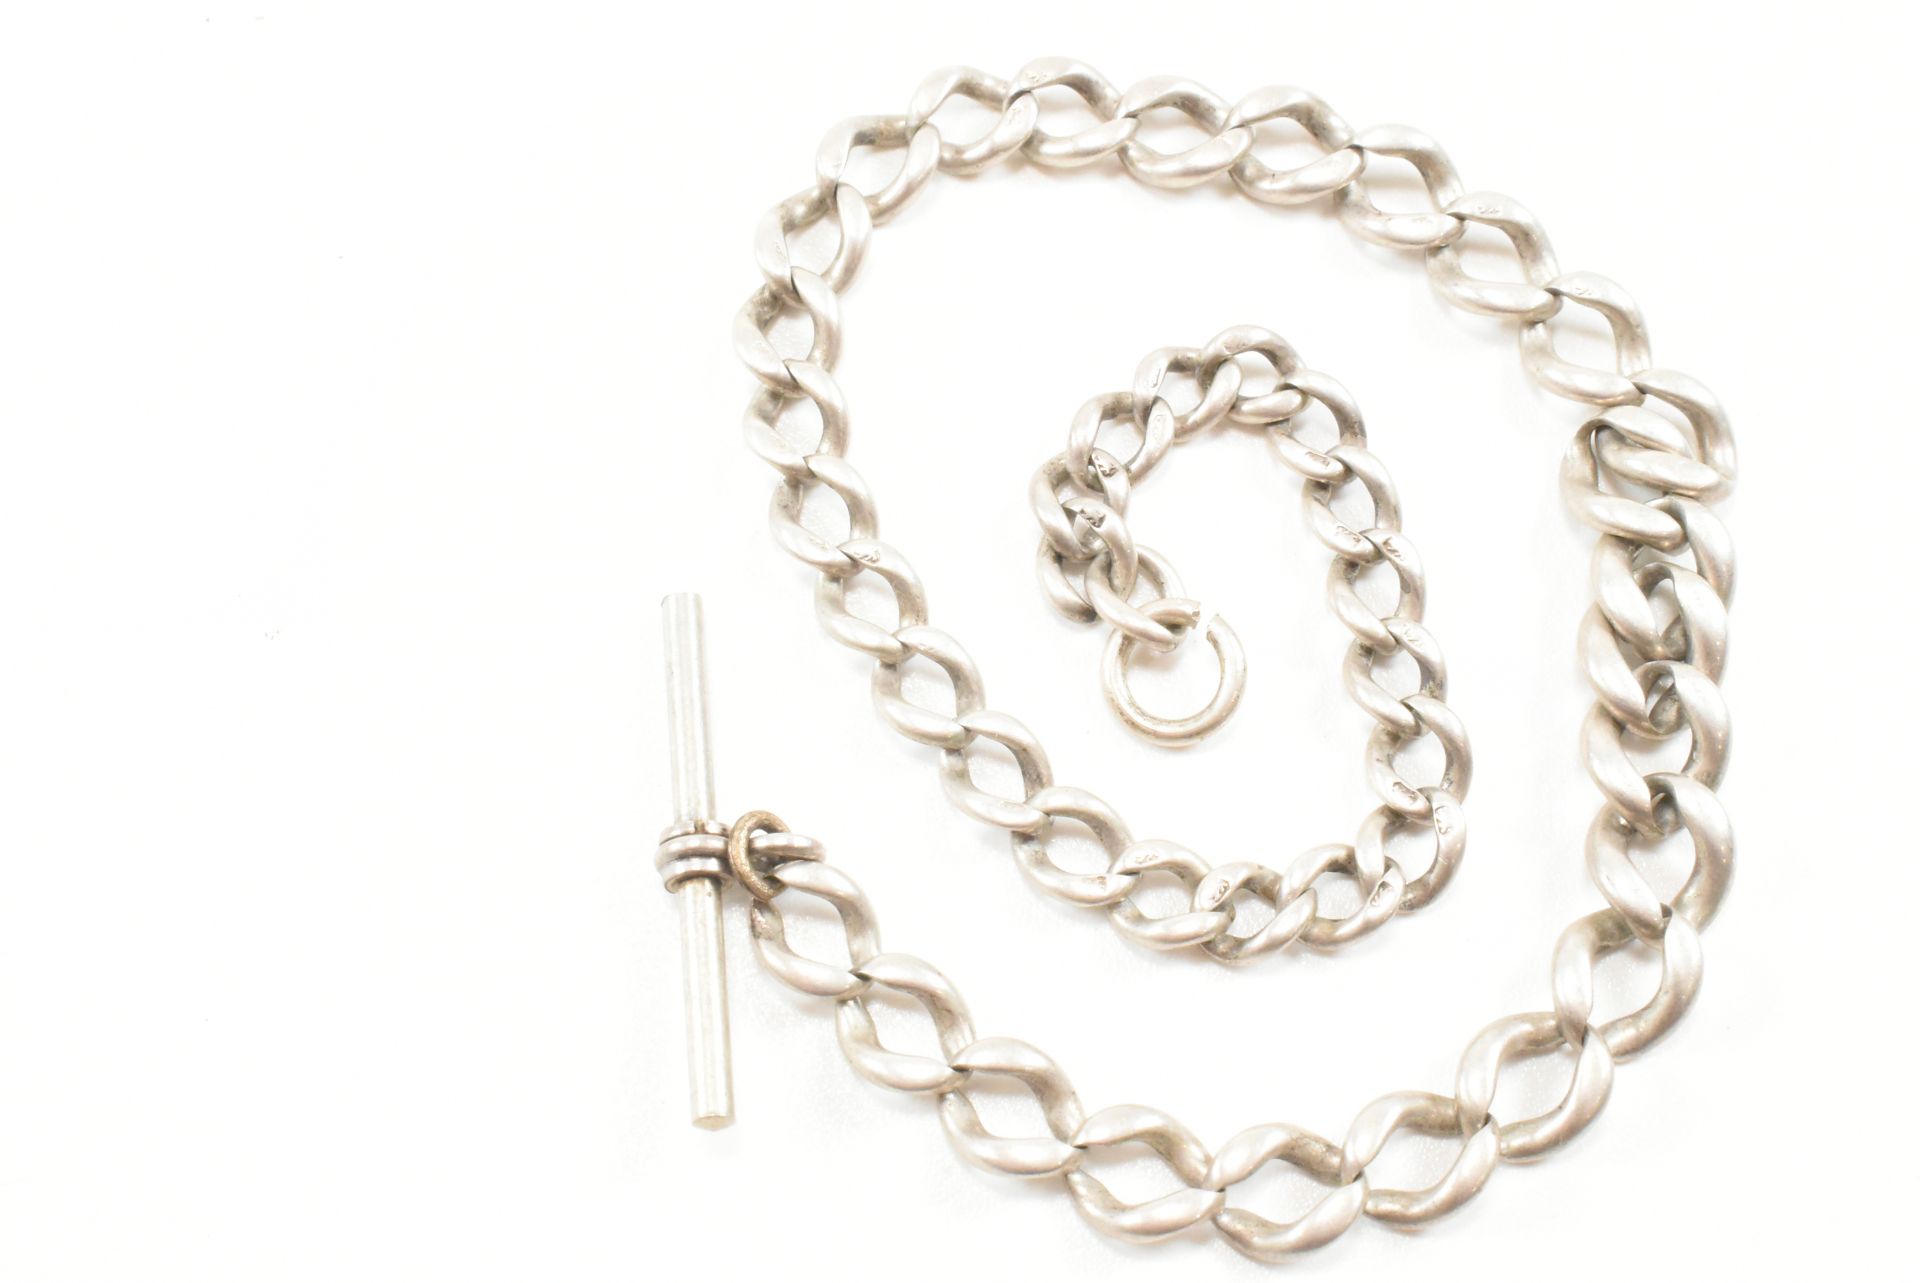 TWO EARLY 20TH CENTURY SILVER WATCH CHAINS - Image 12 of 12